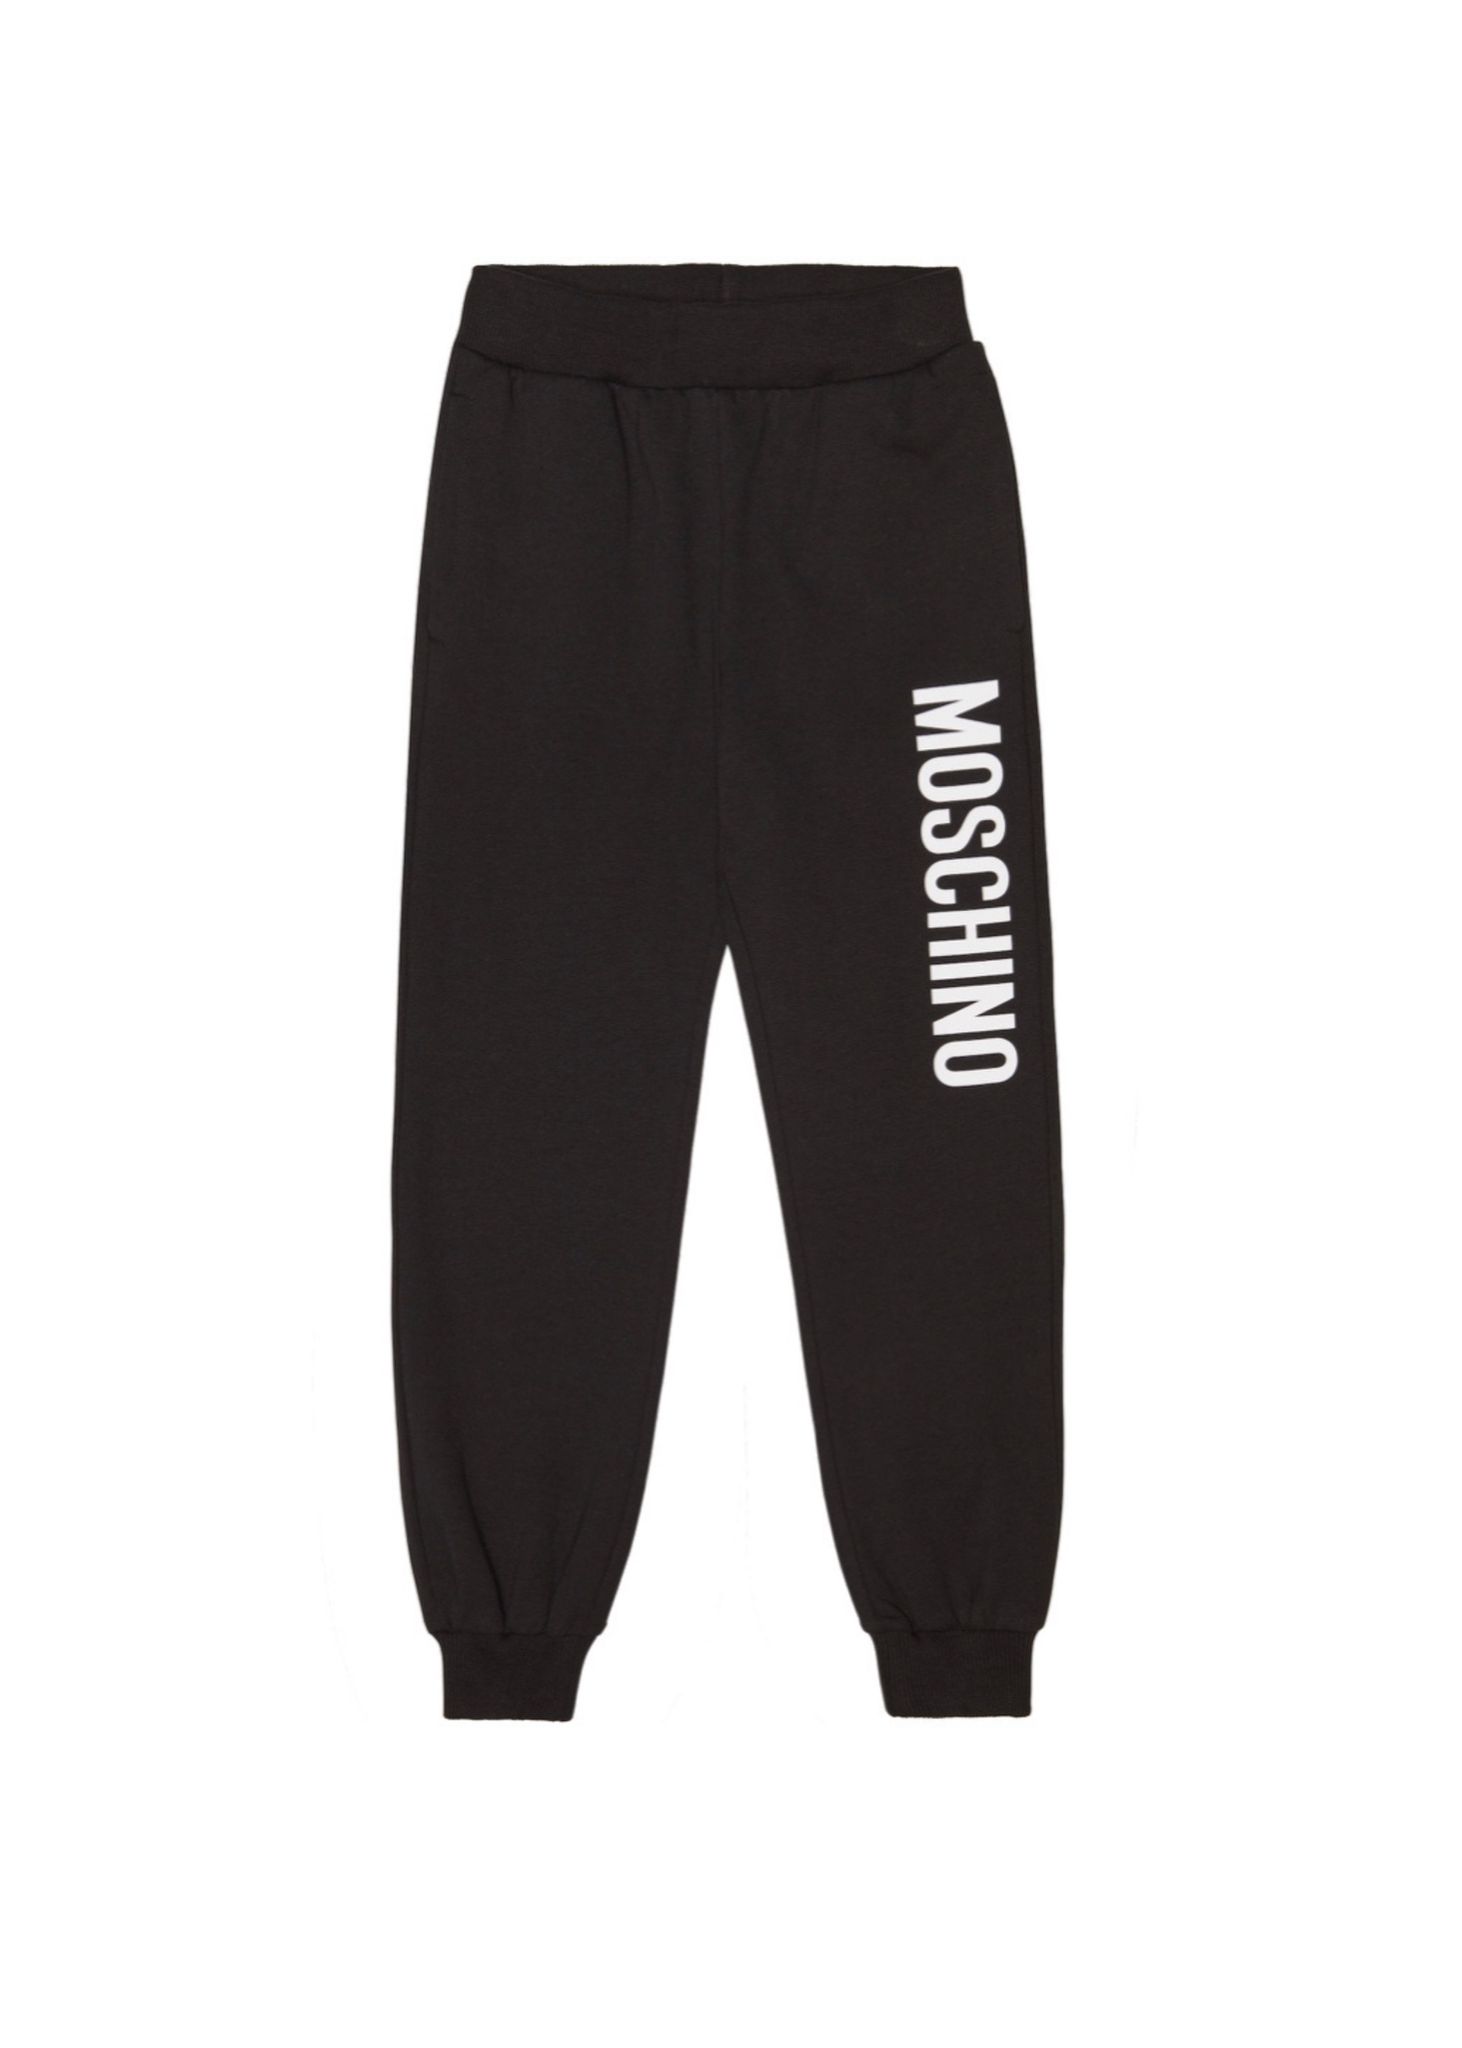 Featured image for “Moschino Pantalone Sportivo”